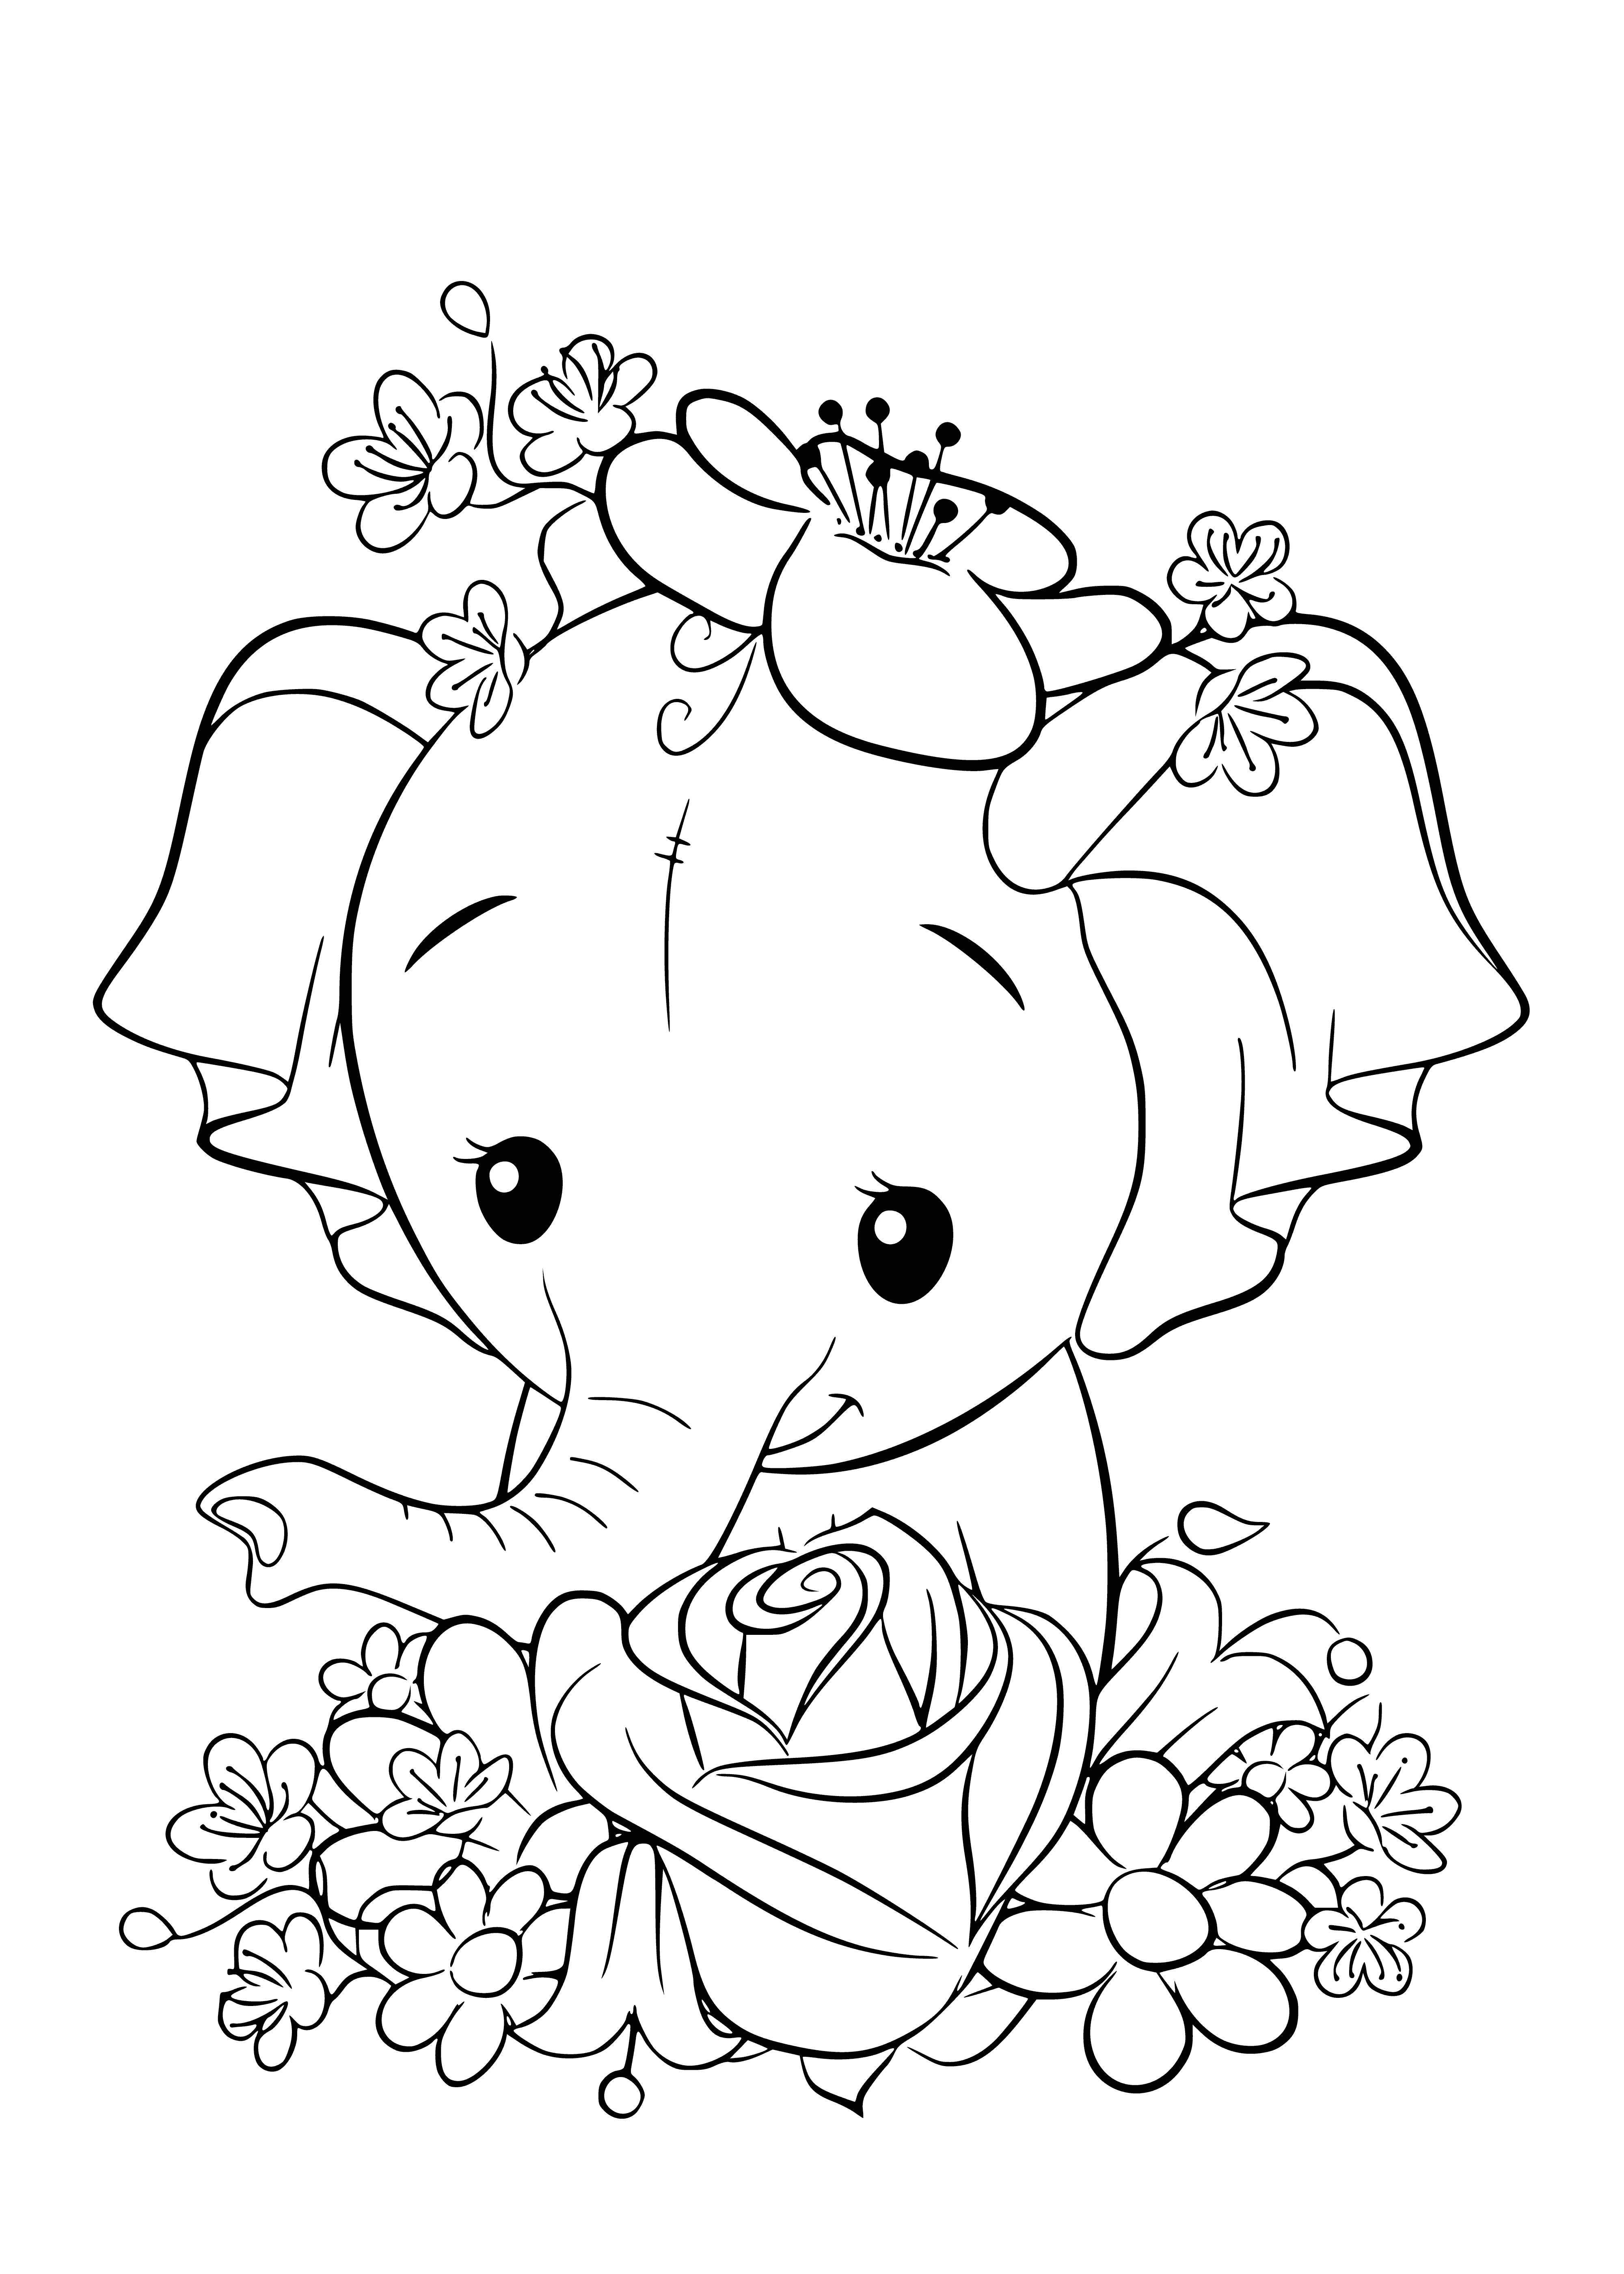 coloring page: Baby elephant coloring page has cute gray elephant standing on green hill surrounded by flowers. #coloring #elephant